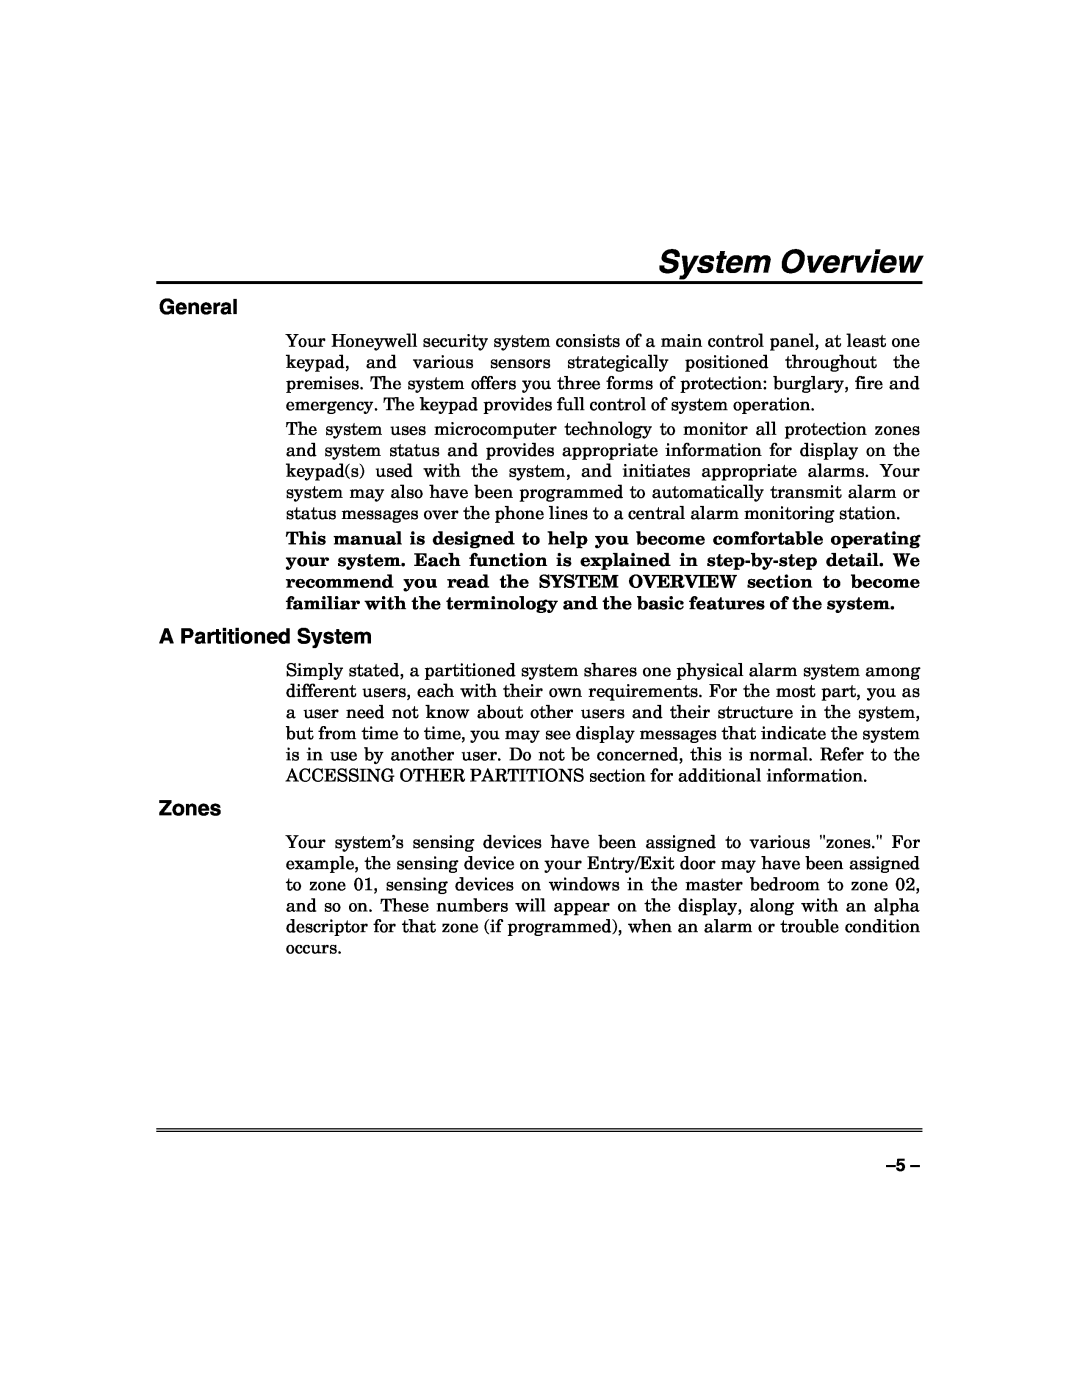 Honeywell N7003V3 manual System Overview, General, A Partitioned System, Zones 